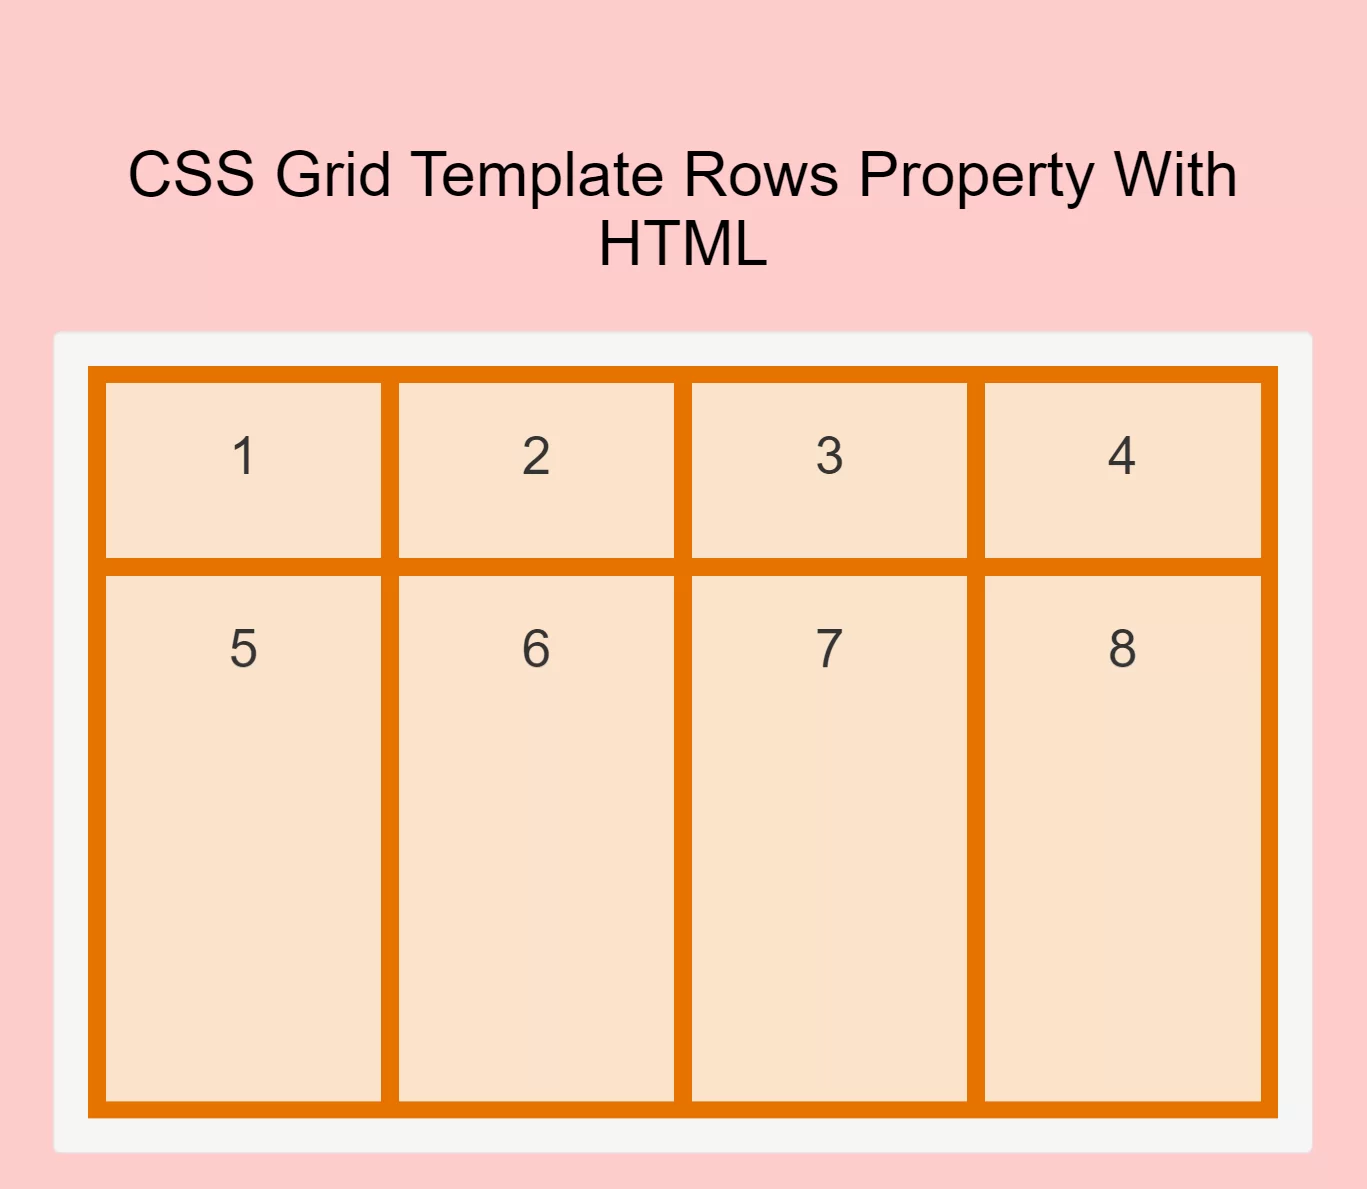 How To Use CSS Grid Template Rows Property With HTML